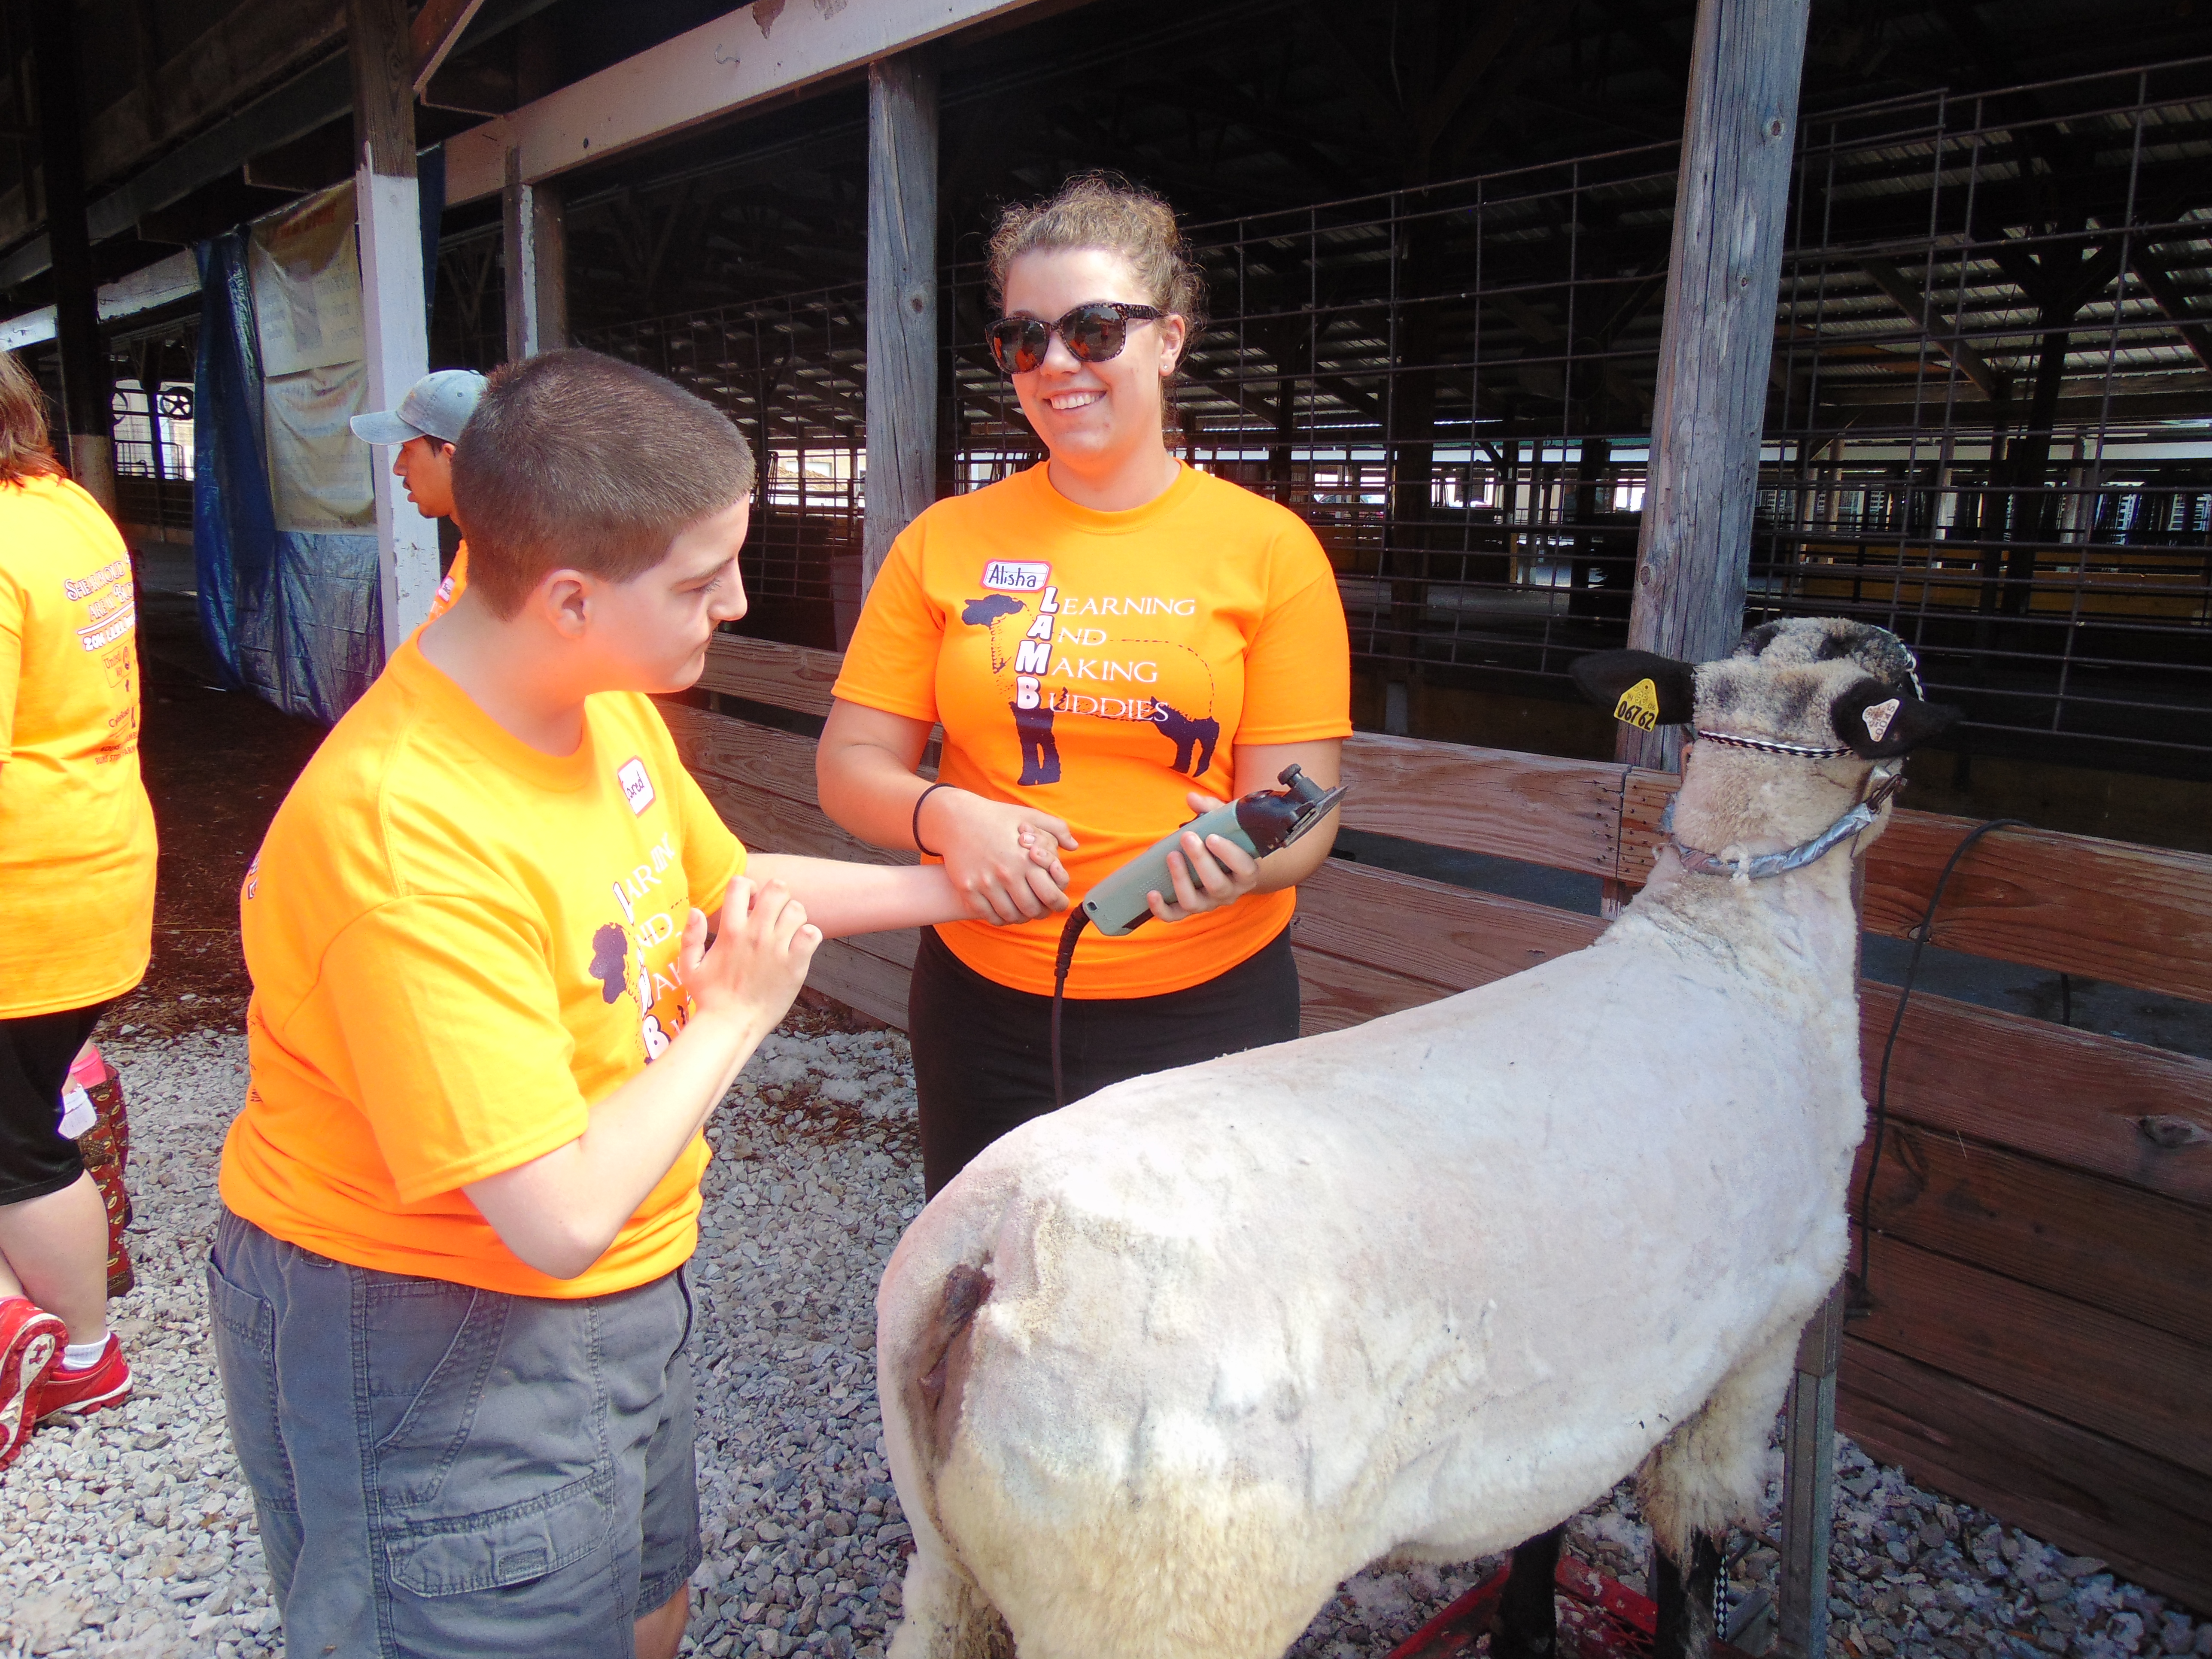 Alisha Boyland, right, a member of the Learning and Making Buddies project, shows Jared Leonard how to shear a sheep. The LAMB project received a $1,000 grant from Youth as Resources to implement a program for Boone County life skills students. The students were paired with Boone County 4-H Lamb Project members to gain experience on what it is like to wash, shear and show sheep. (Submitted photo)